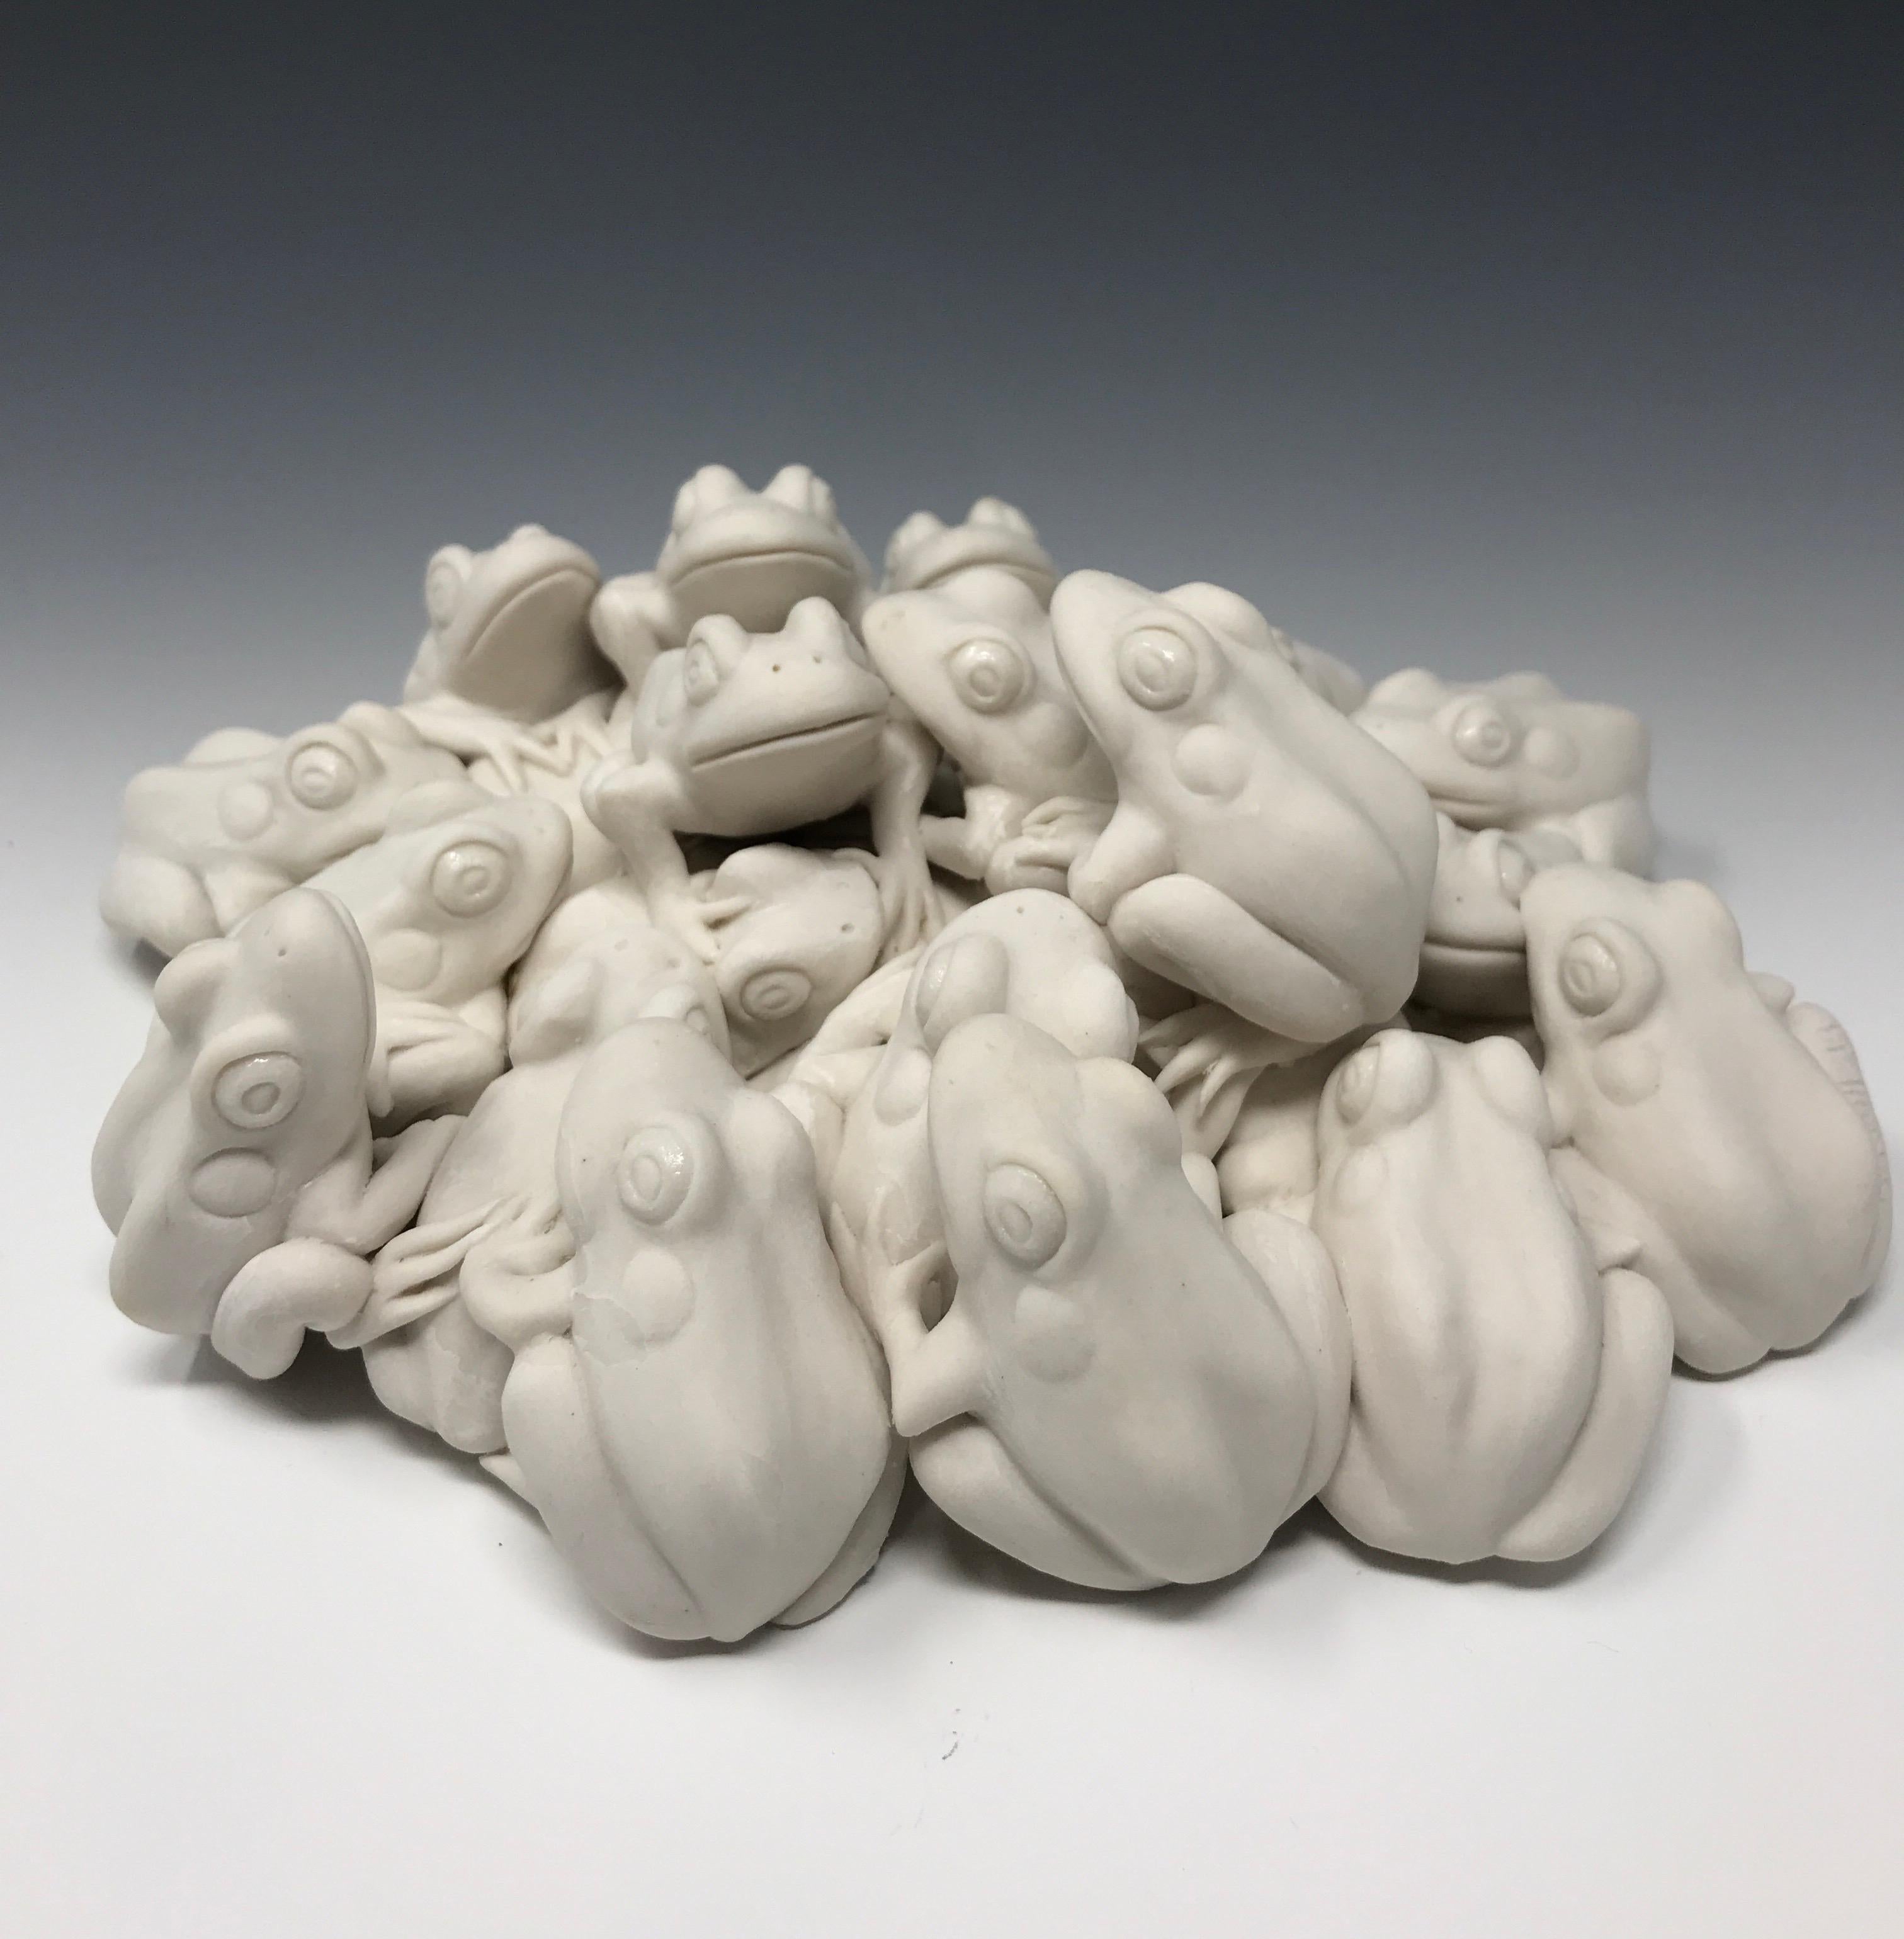 This porcelain frog pile was meticulously created by New York artist, Bethany Krull and is a study of amphibian form as well as a comment on unity and solidarity.  The details in each individual frog are impeccable and hand built in a super white